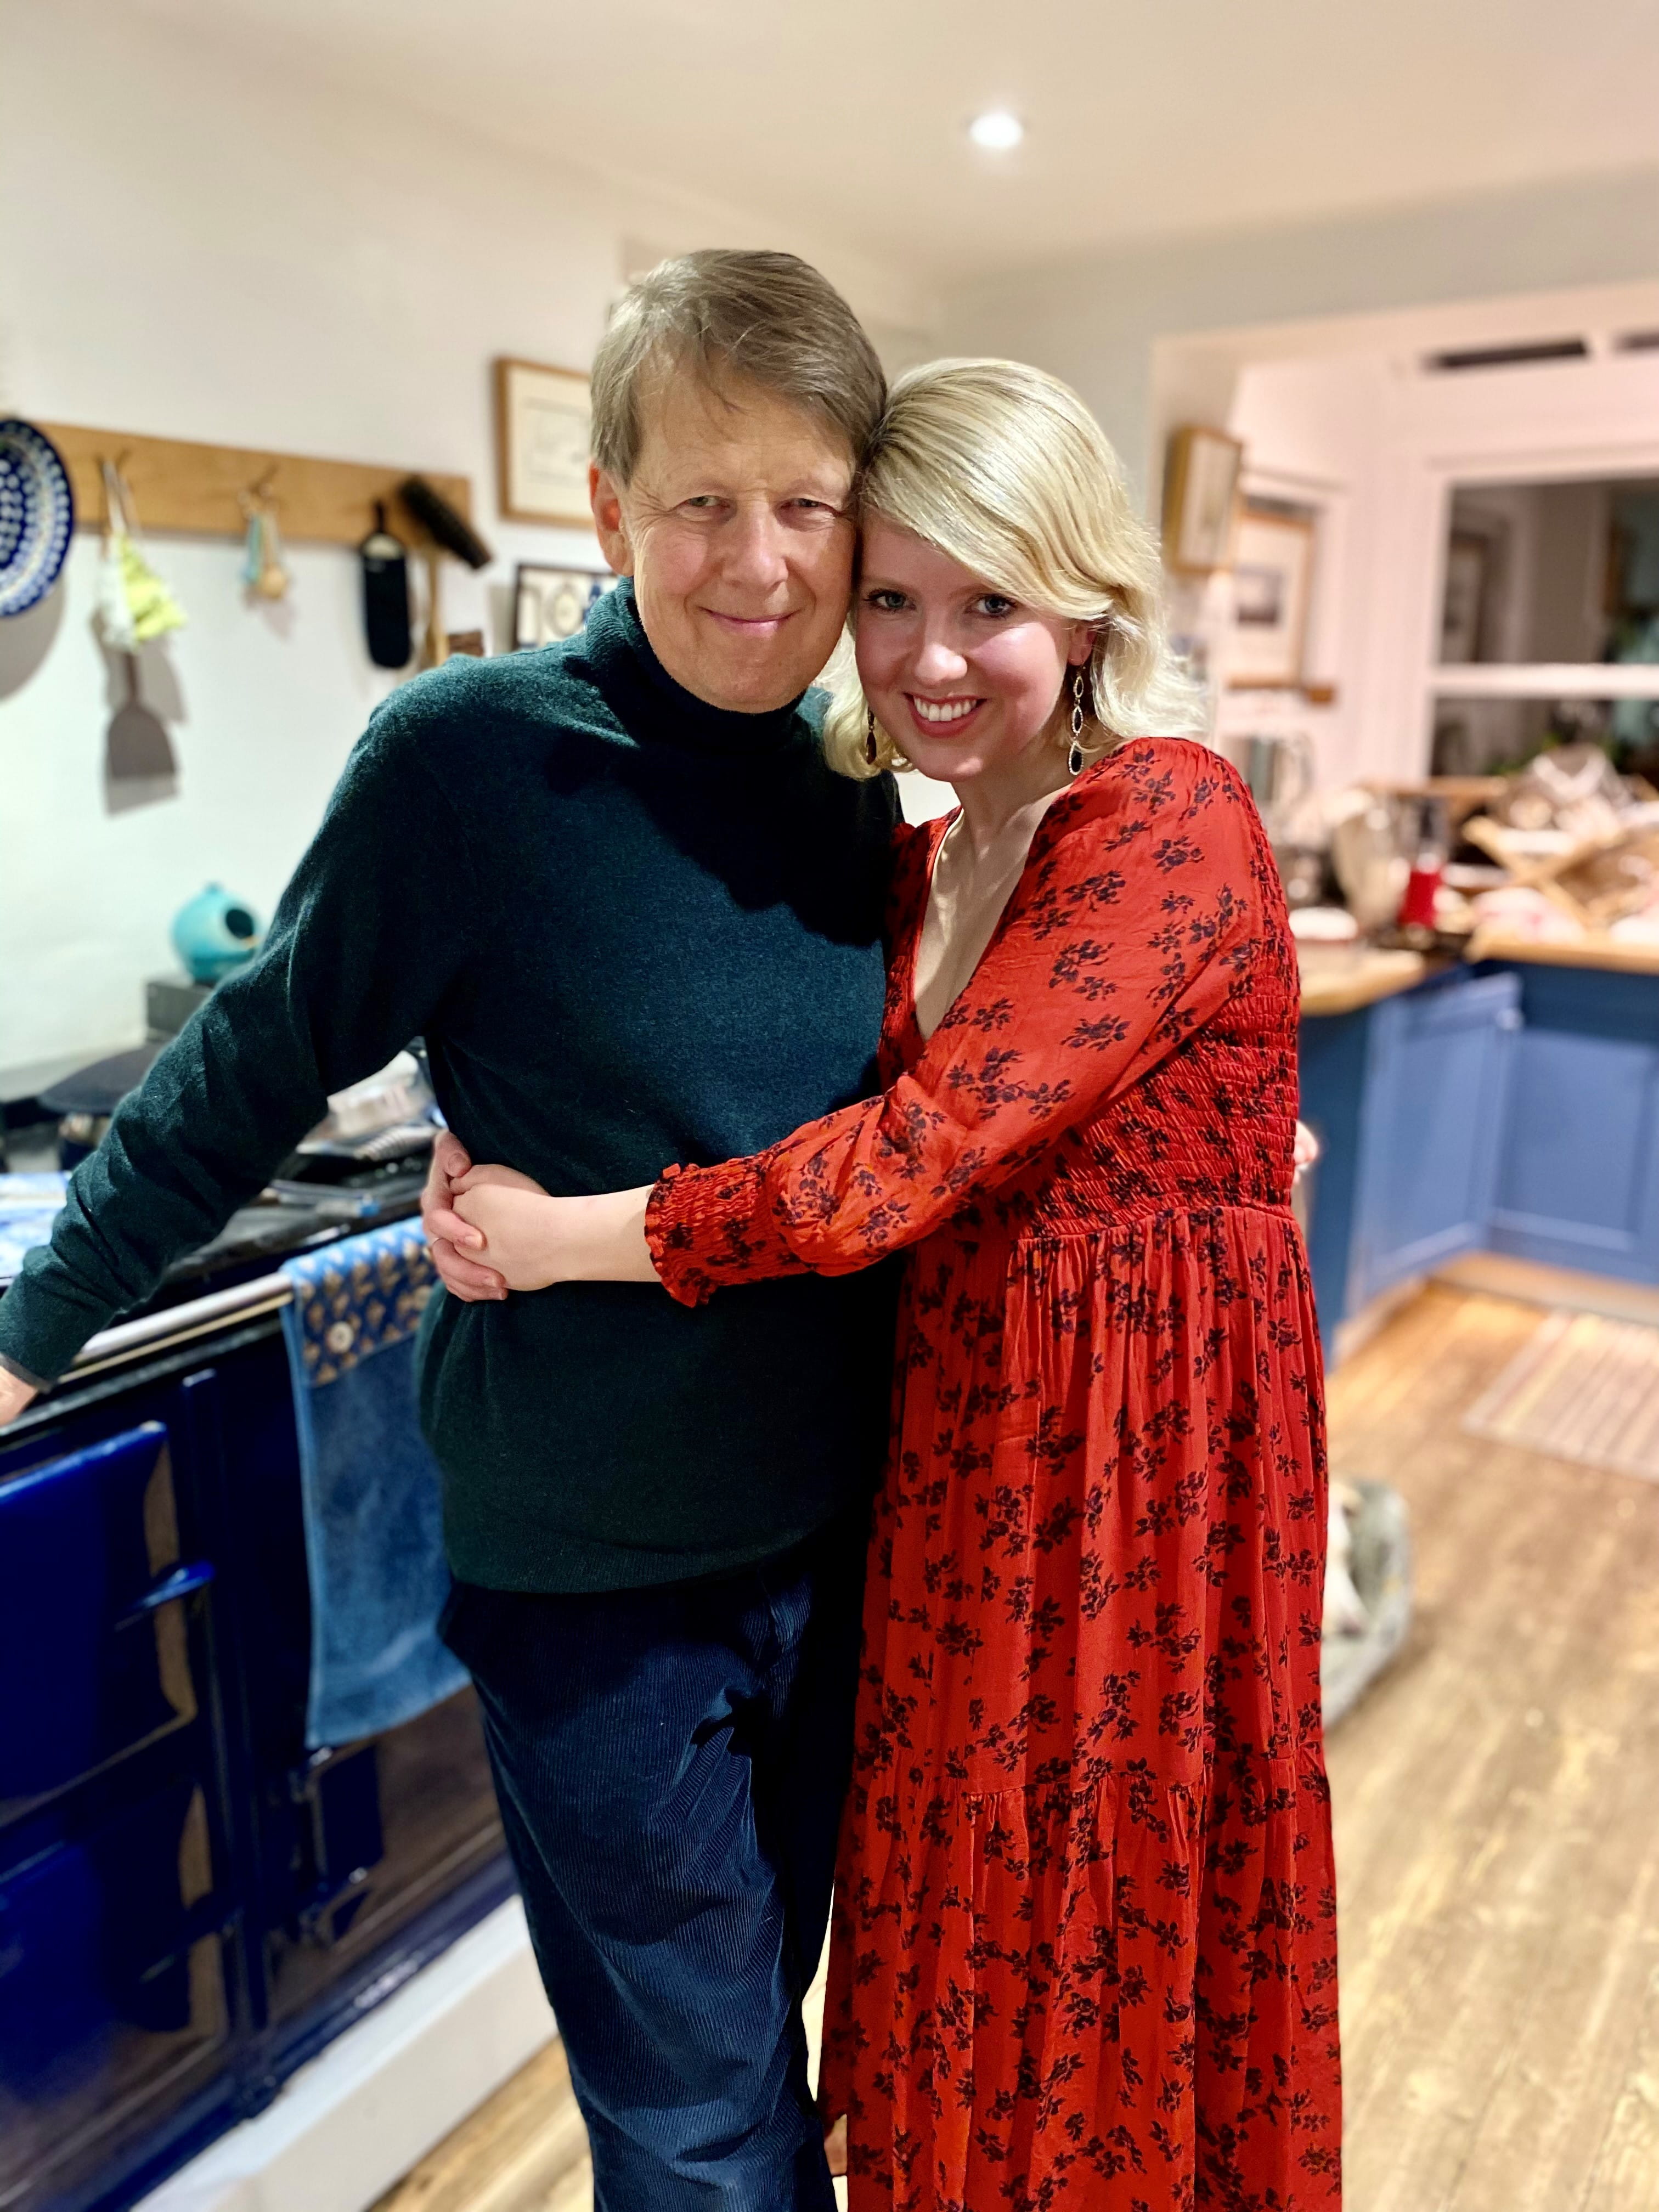 Flora and Bill Turnbull in a kitchen